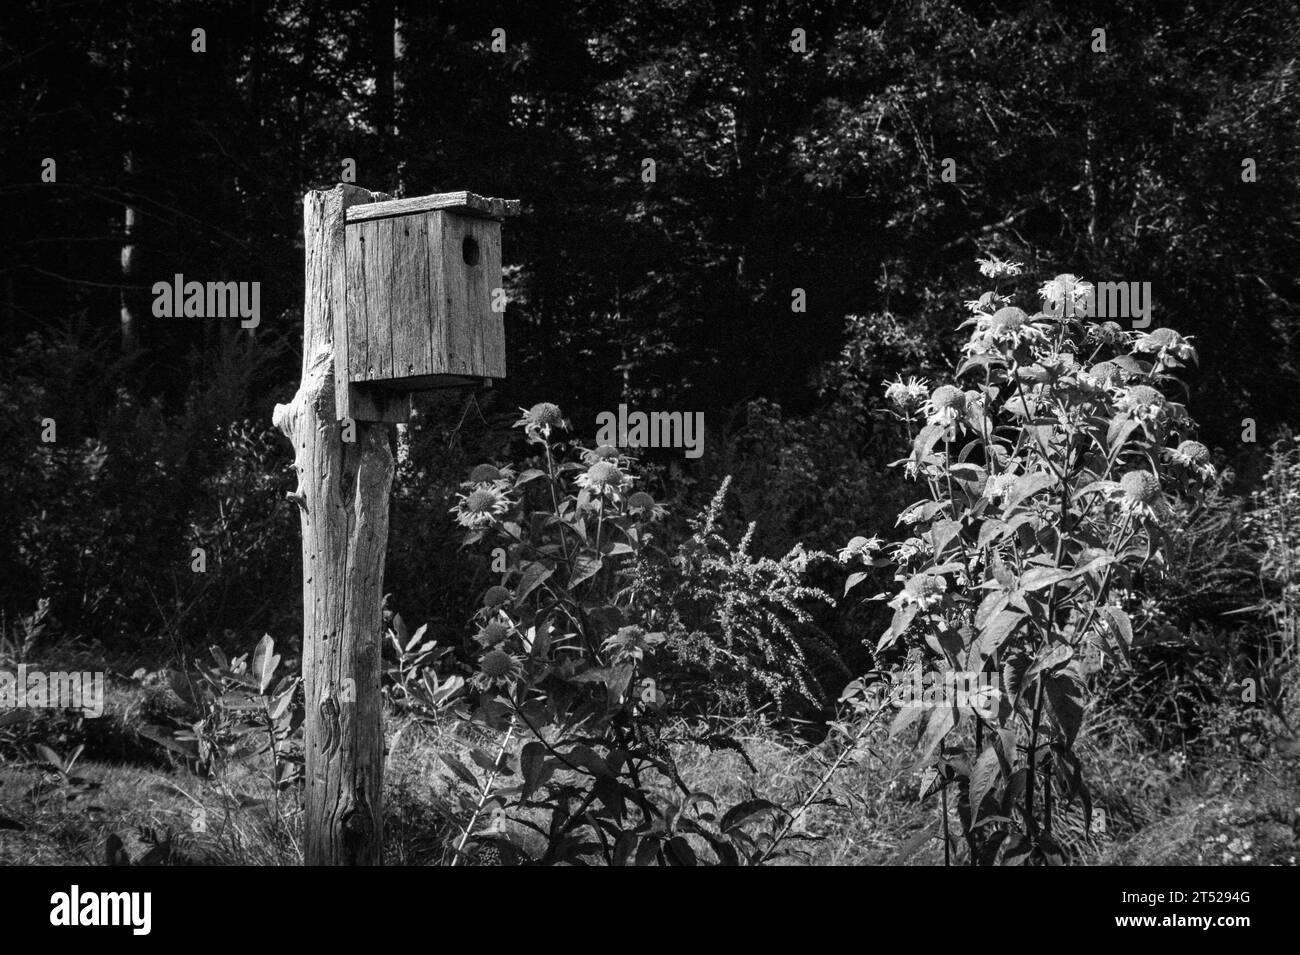 A single wooden birdhouse perched on a worn wood post in the middle of a blooming field of wildflowers. The image was captured on analog black and whi Stock Photo